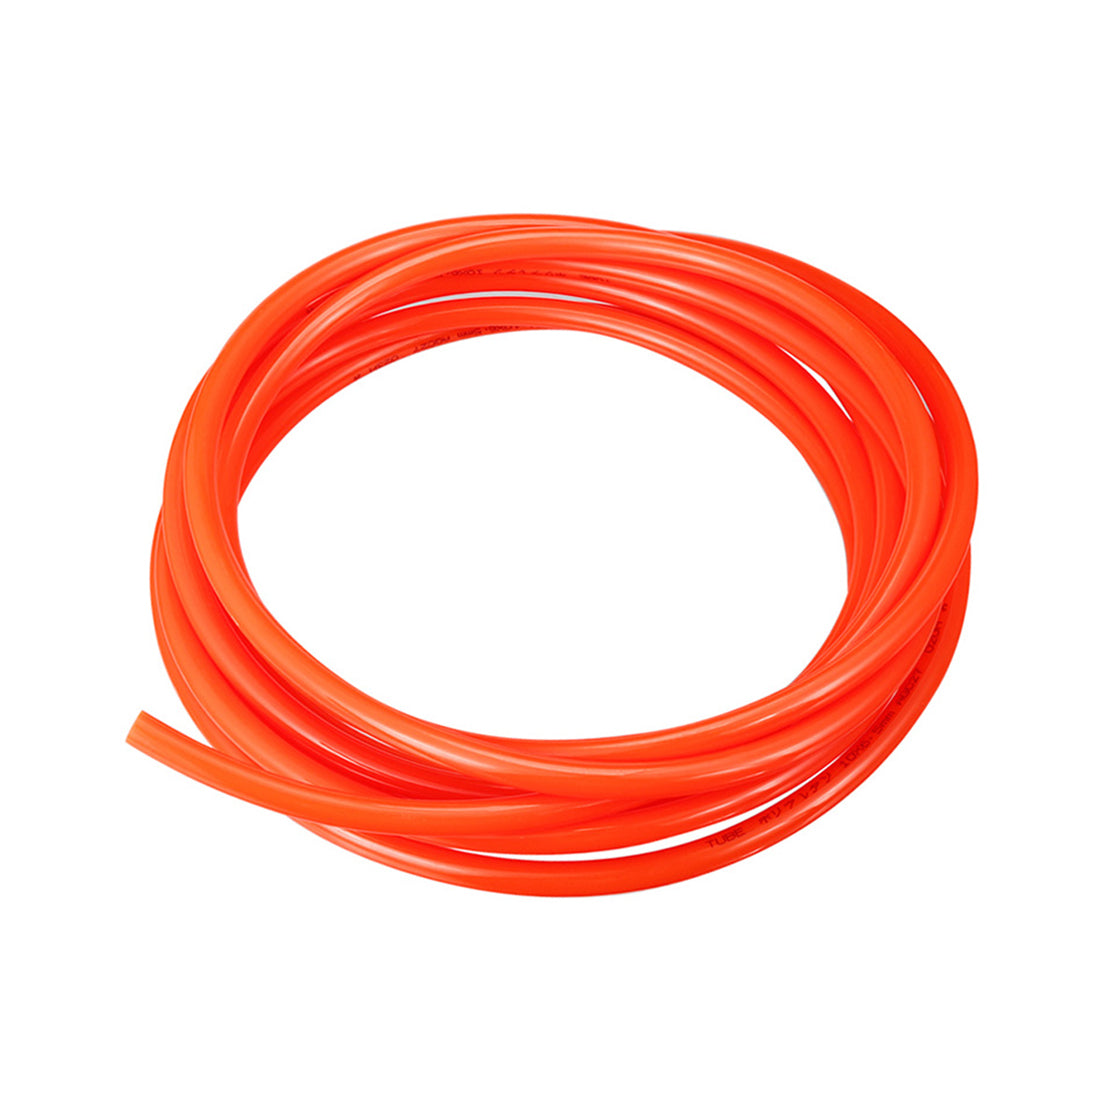 uxcell Uxcell 10mm X 6.5mm Pneumatic Air PU Hose Pipe Tube 5 Meter 16.4ft Orange